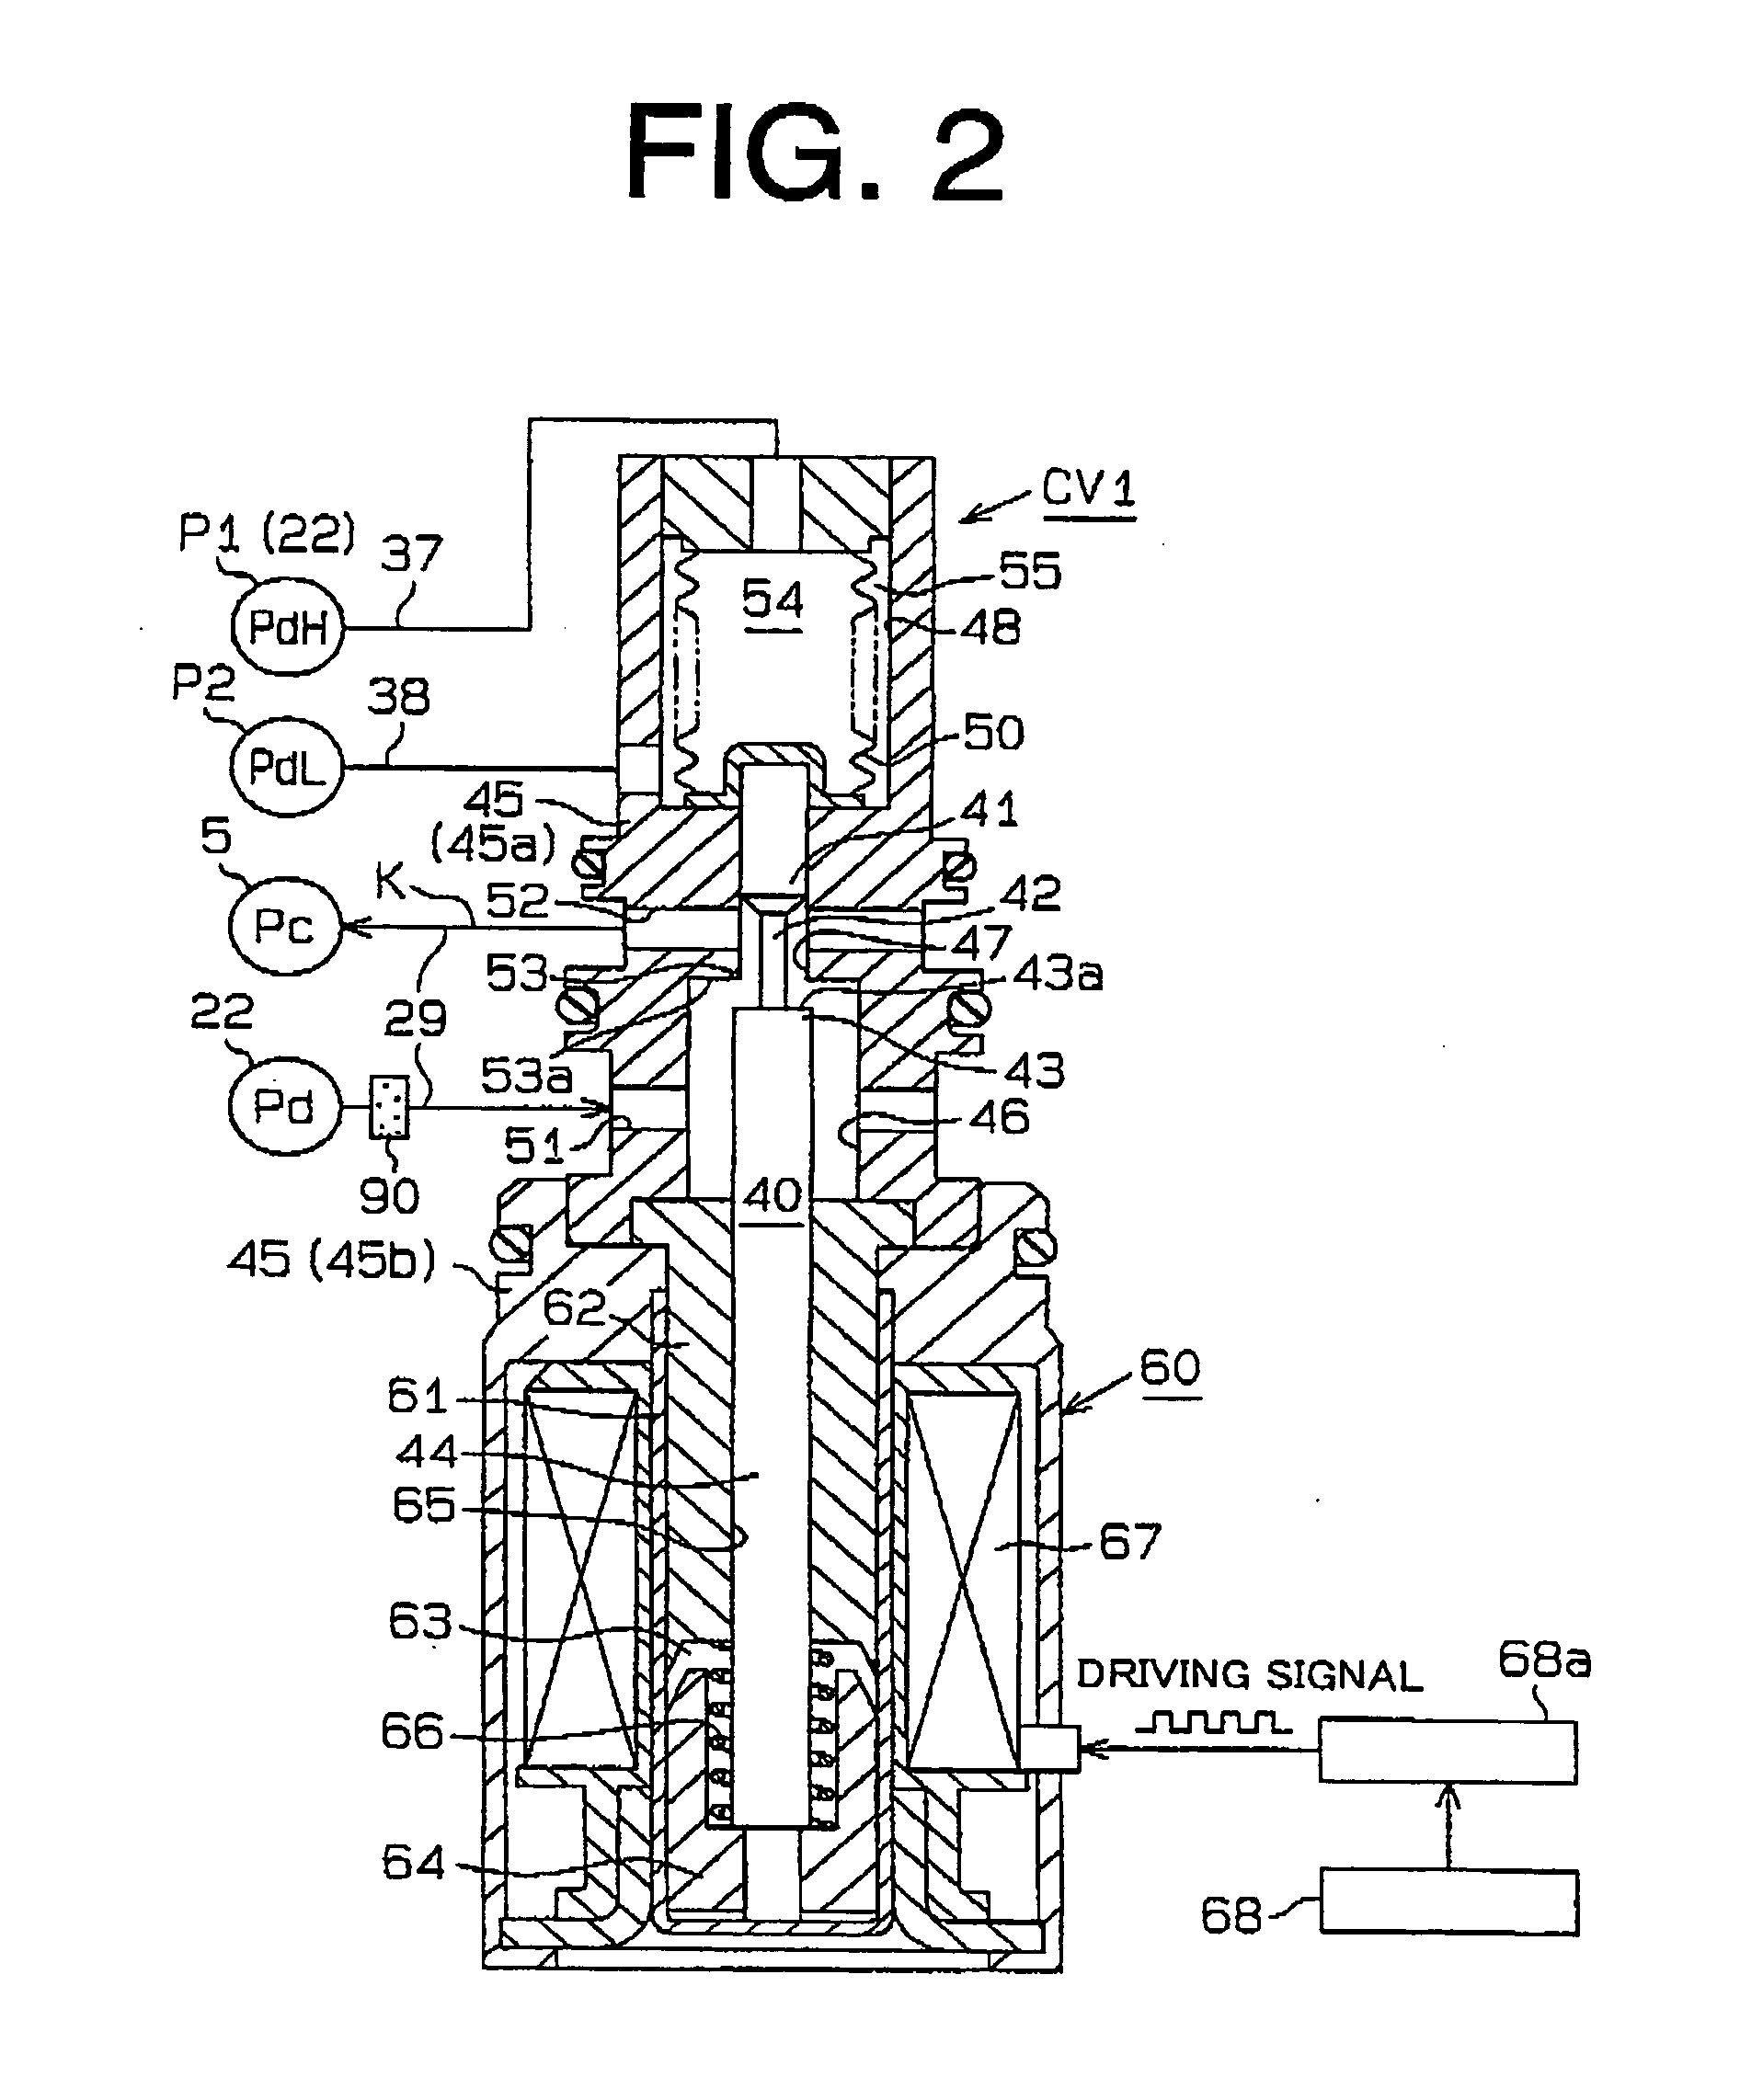 Displacement control mechanism for variable displacement compressor